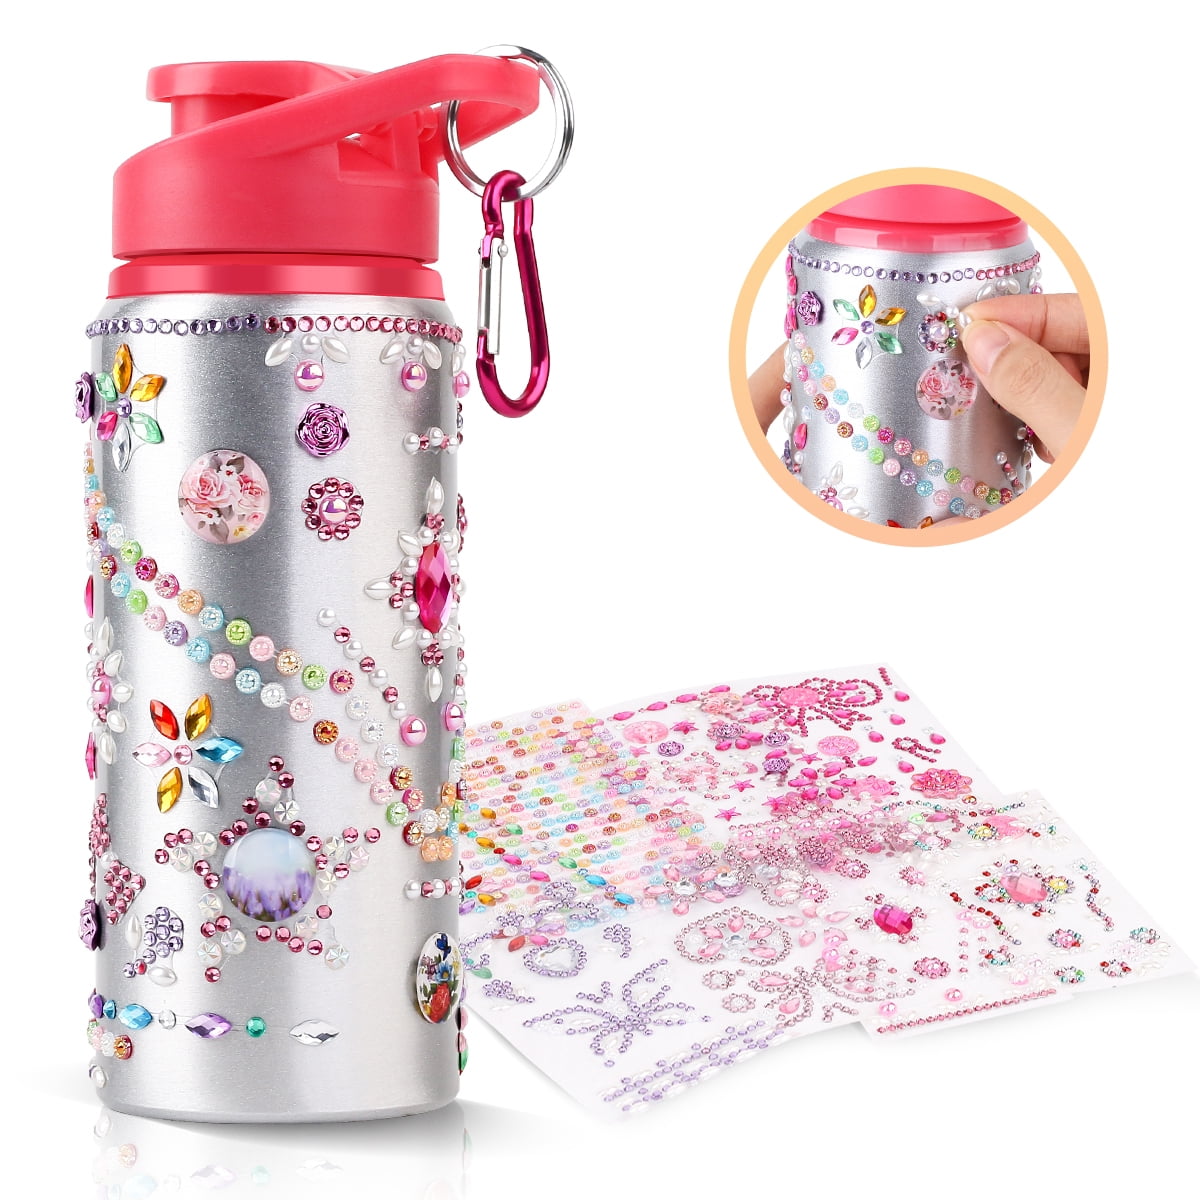  Gift for Girls, Decorate Your Own Water Bottle with